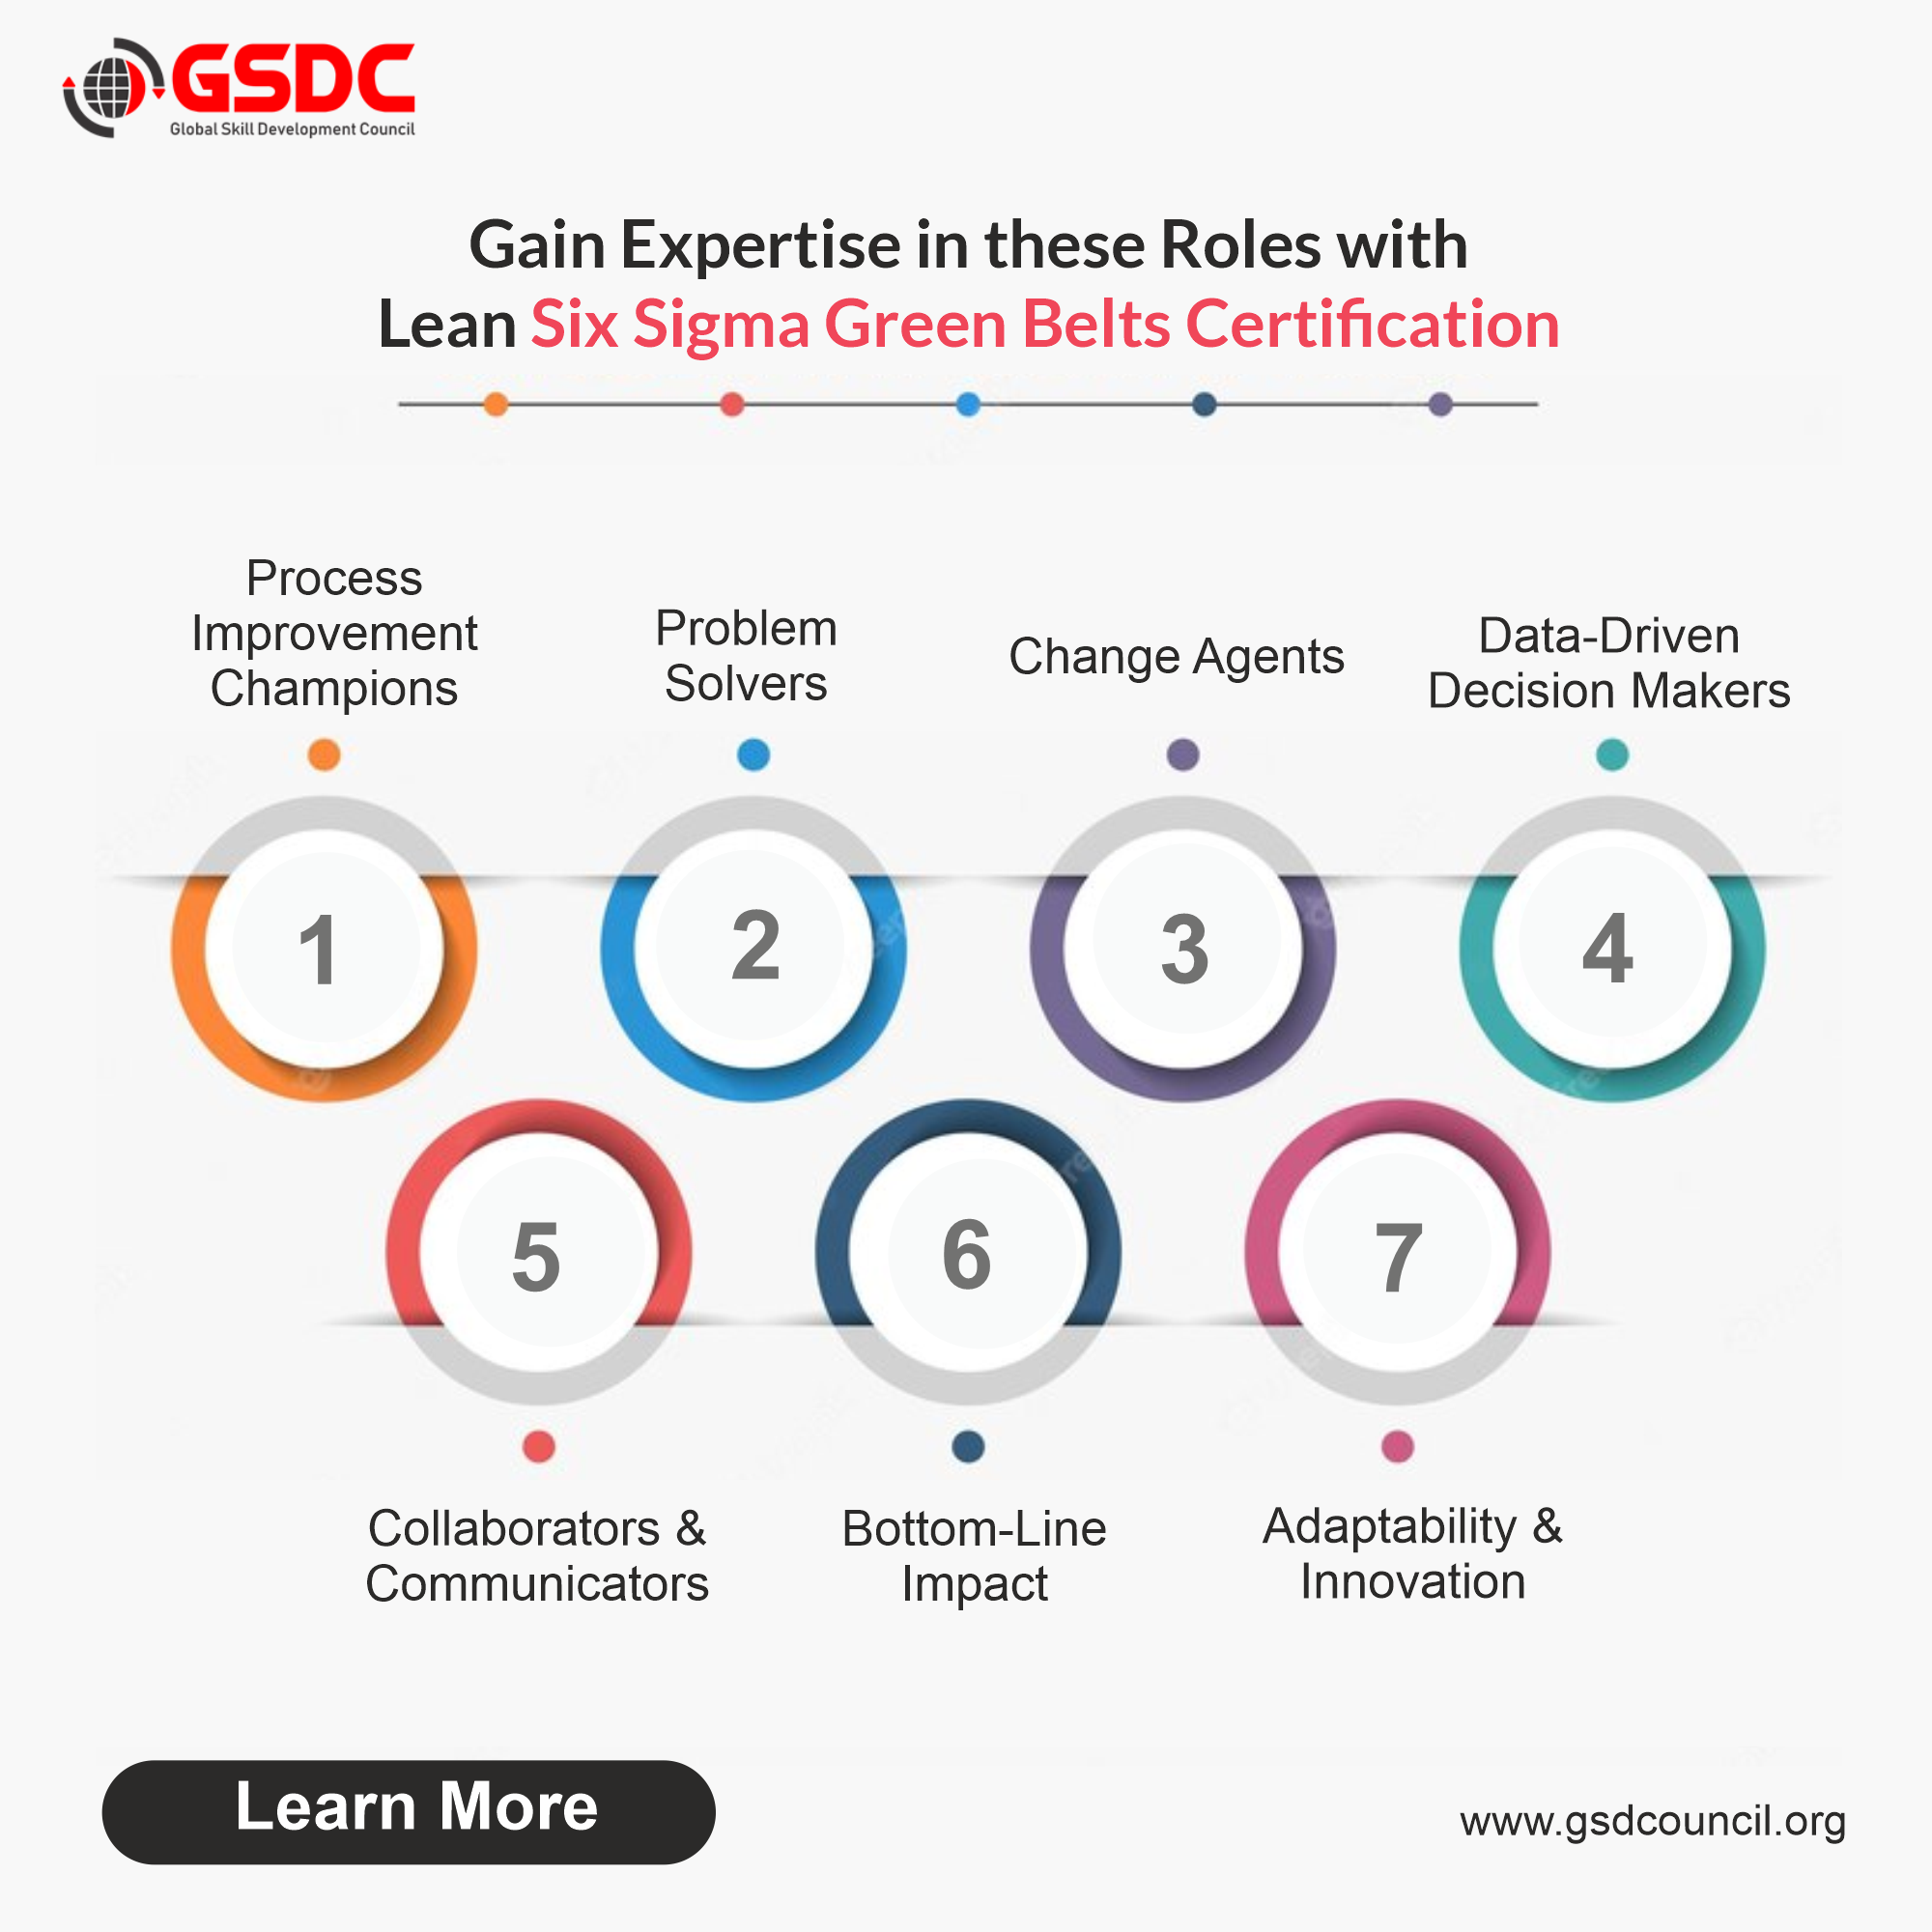 Gain Expertise in these roles with Lean Six Sigma Green Belts Certification